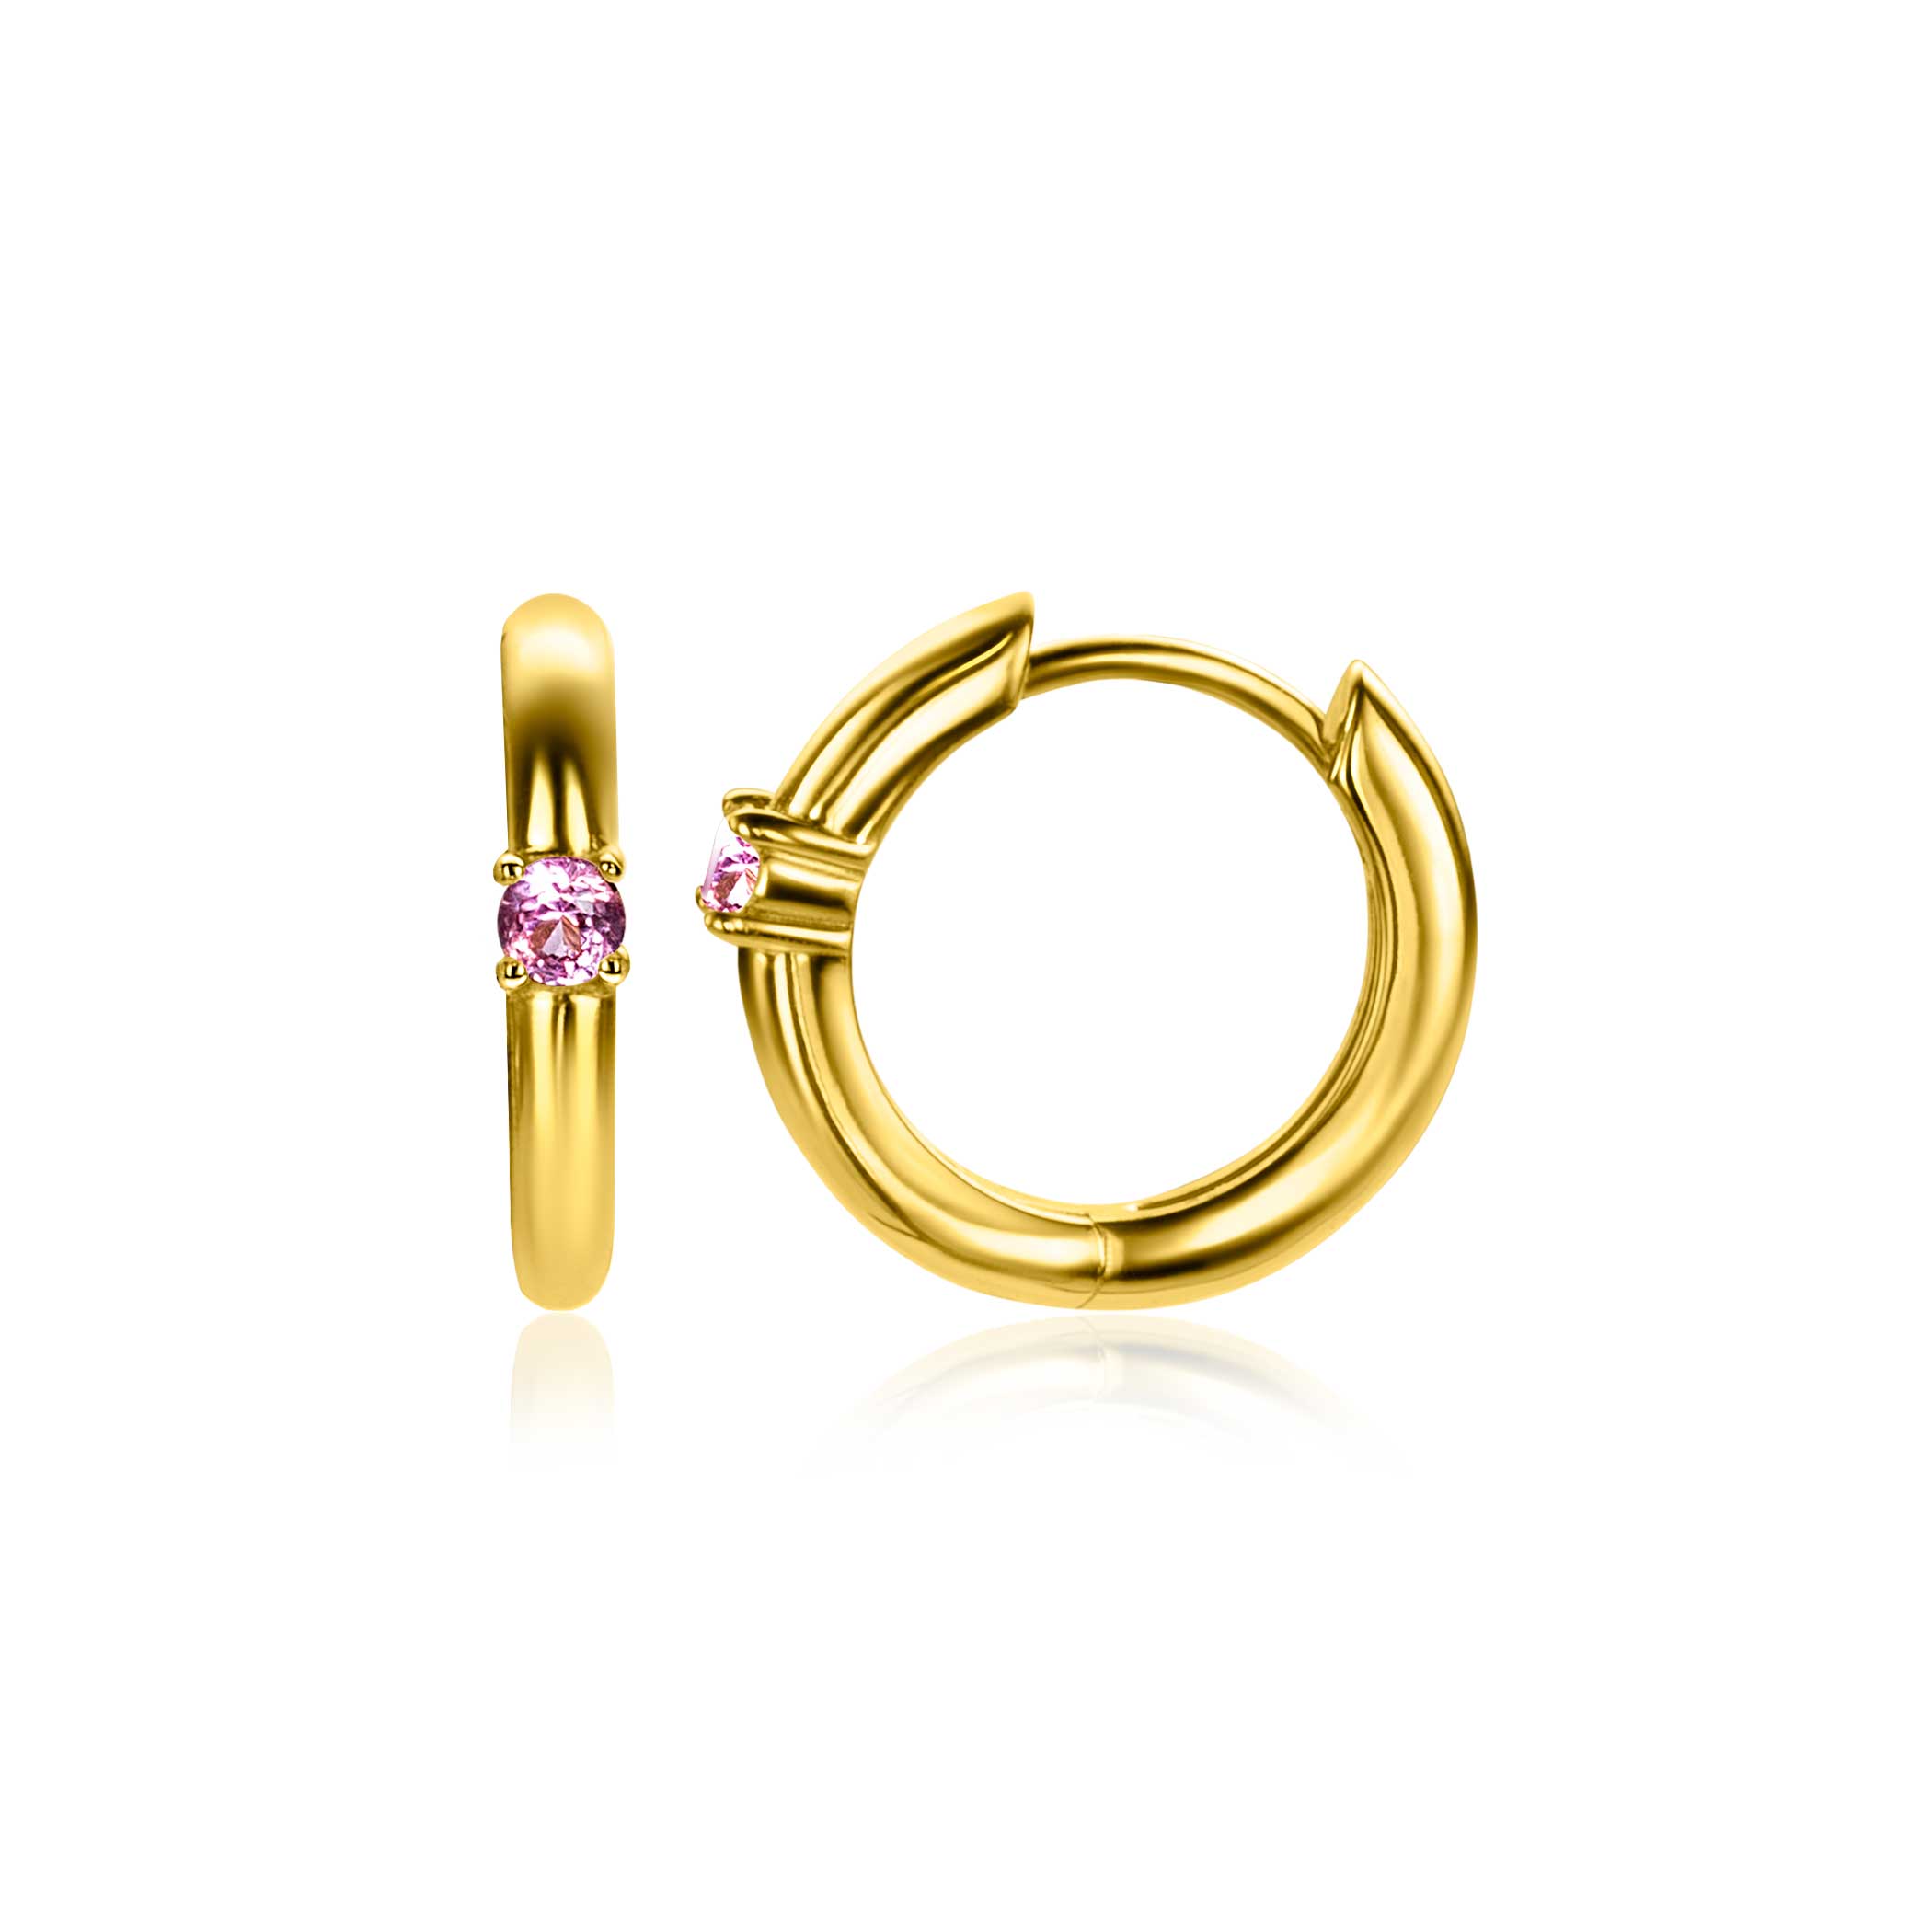 OCTOBER Hoop Earrings 13mm Gold Plated with Birthstone Pink Rose Quartz Zirconia